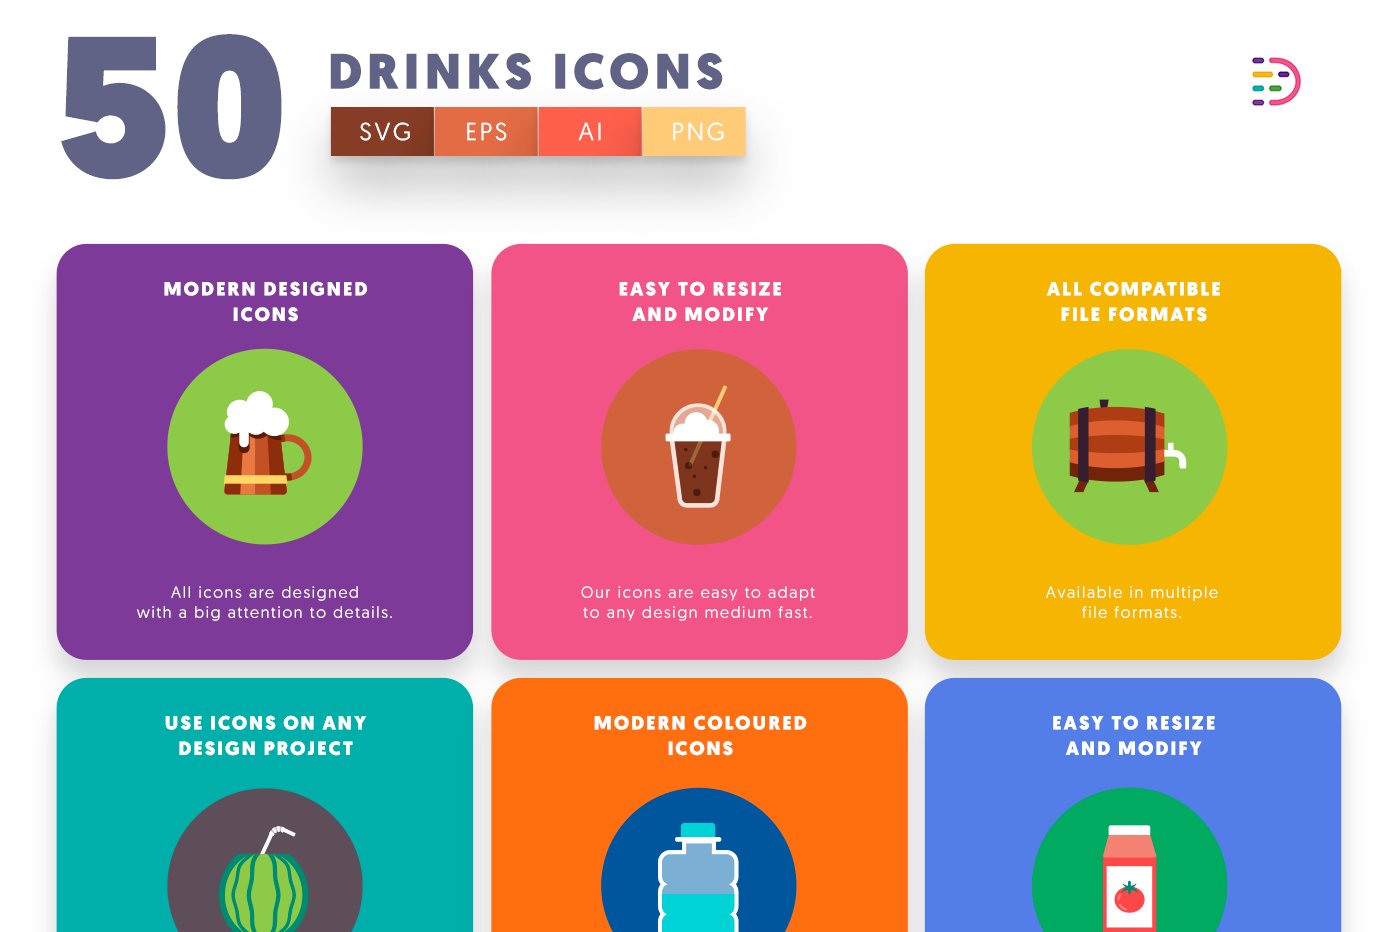 50 drinks icons cover 5 113